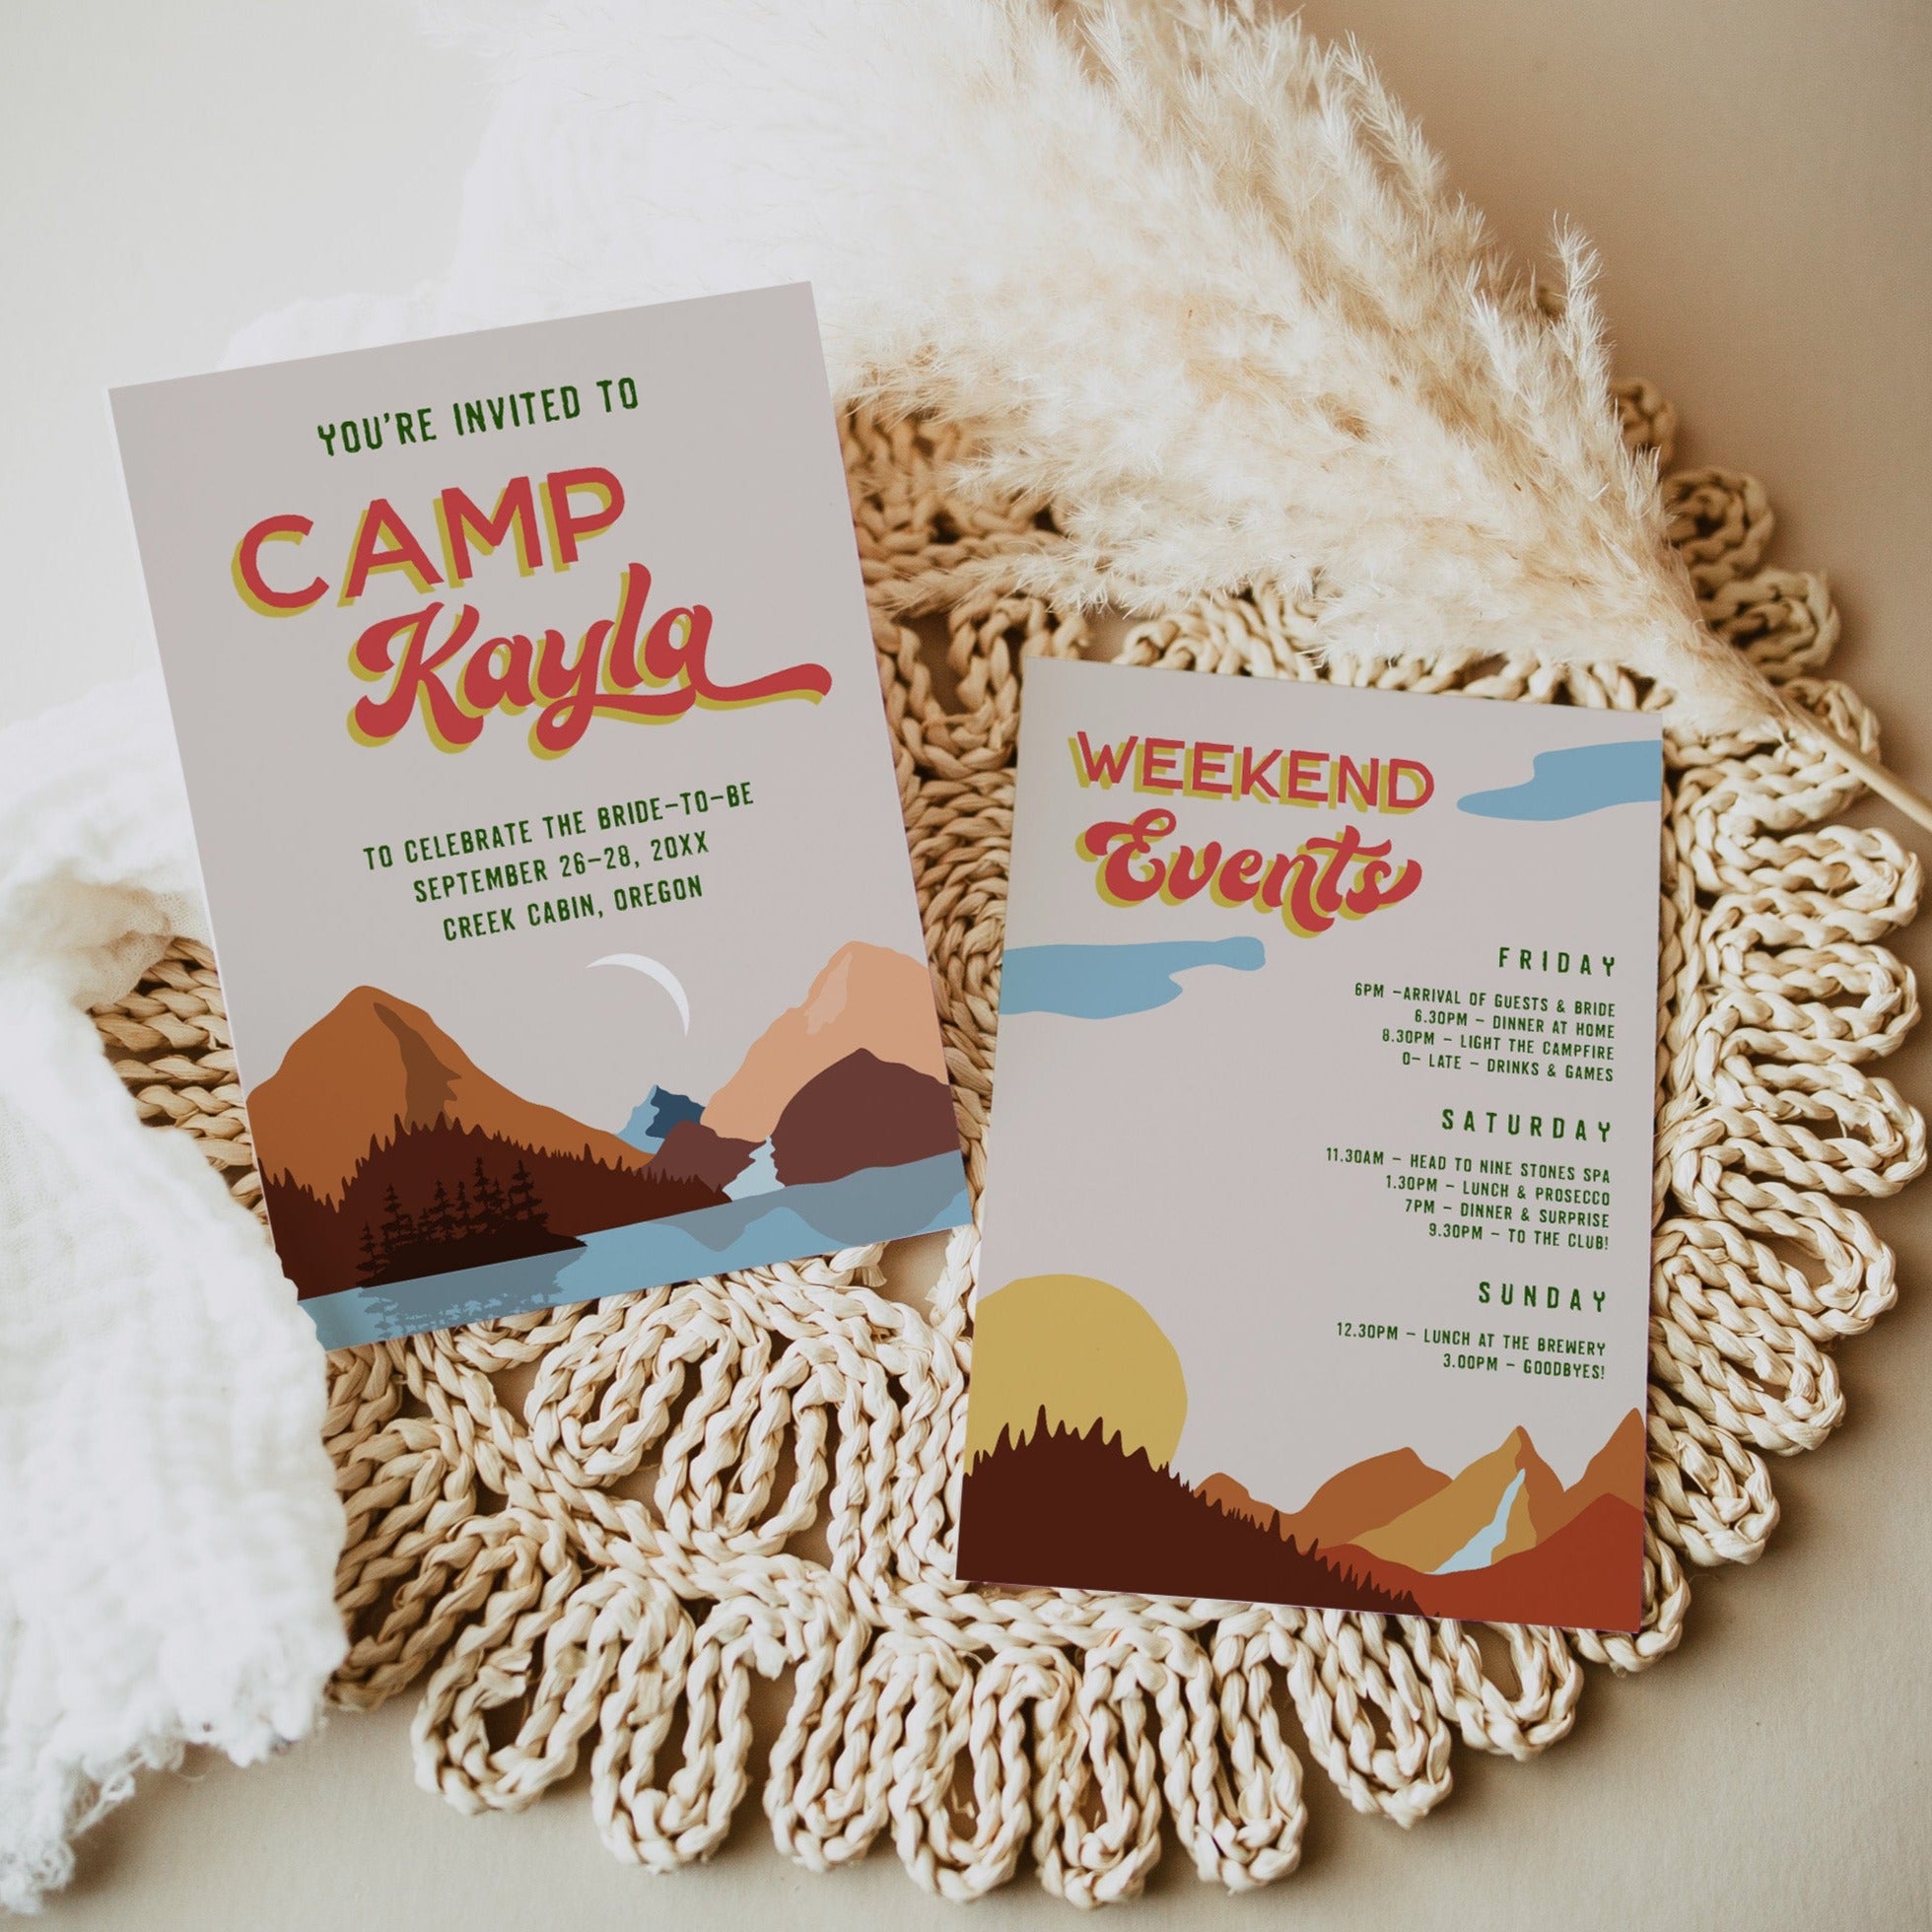 Fully editable and printable retro bachelorette invitation with a pine cabin design. Perfect for a cabin adventure Bachelorette themed party